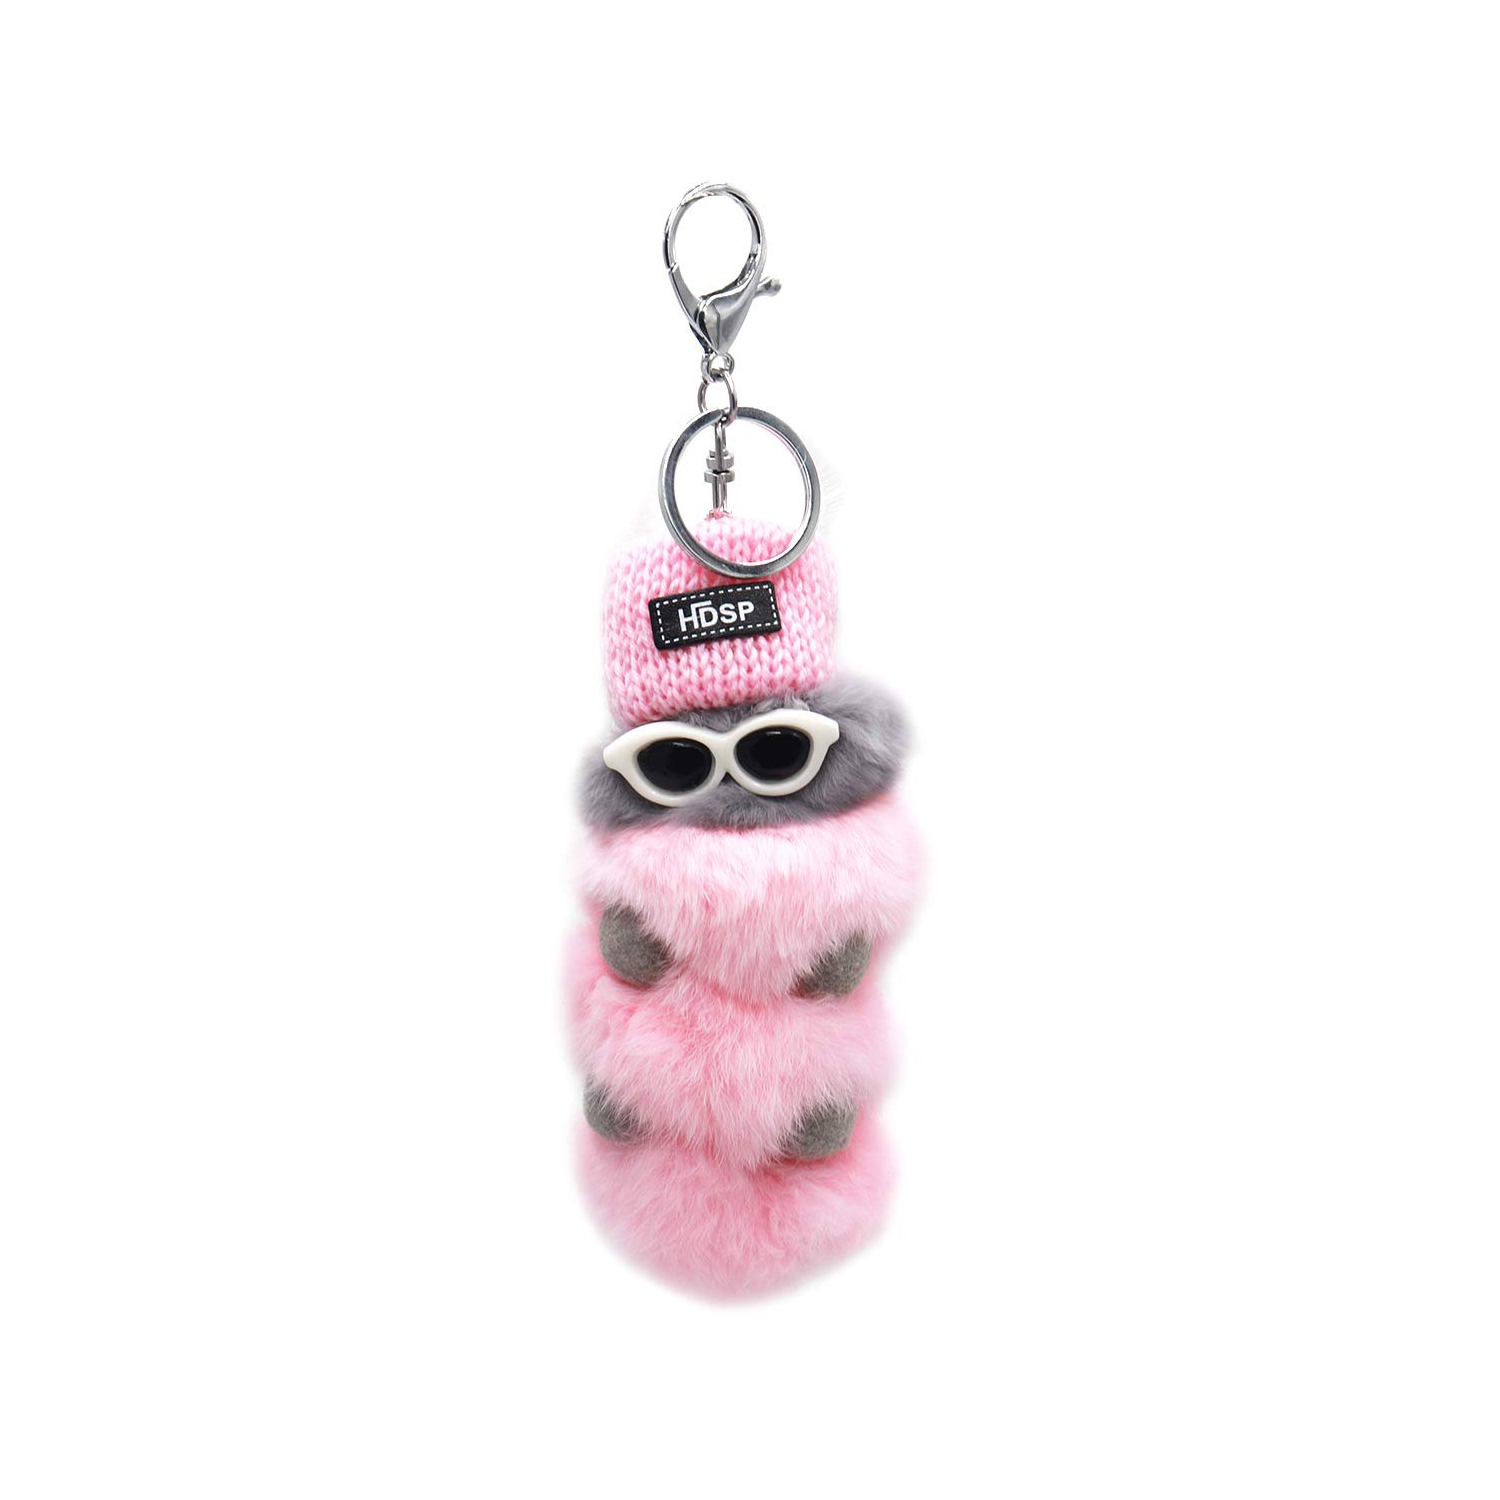 Rex Rabbit Pom Keychain: Adorable Caterpillar with Sunglasses & Winter Hat, Perfect for Animal Lovers. Enhances Beach Purses & Bags! Available in Pink & Grey.